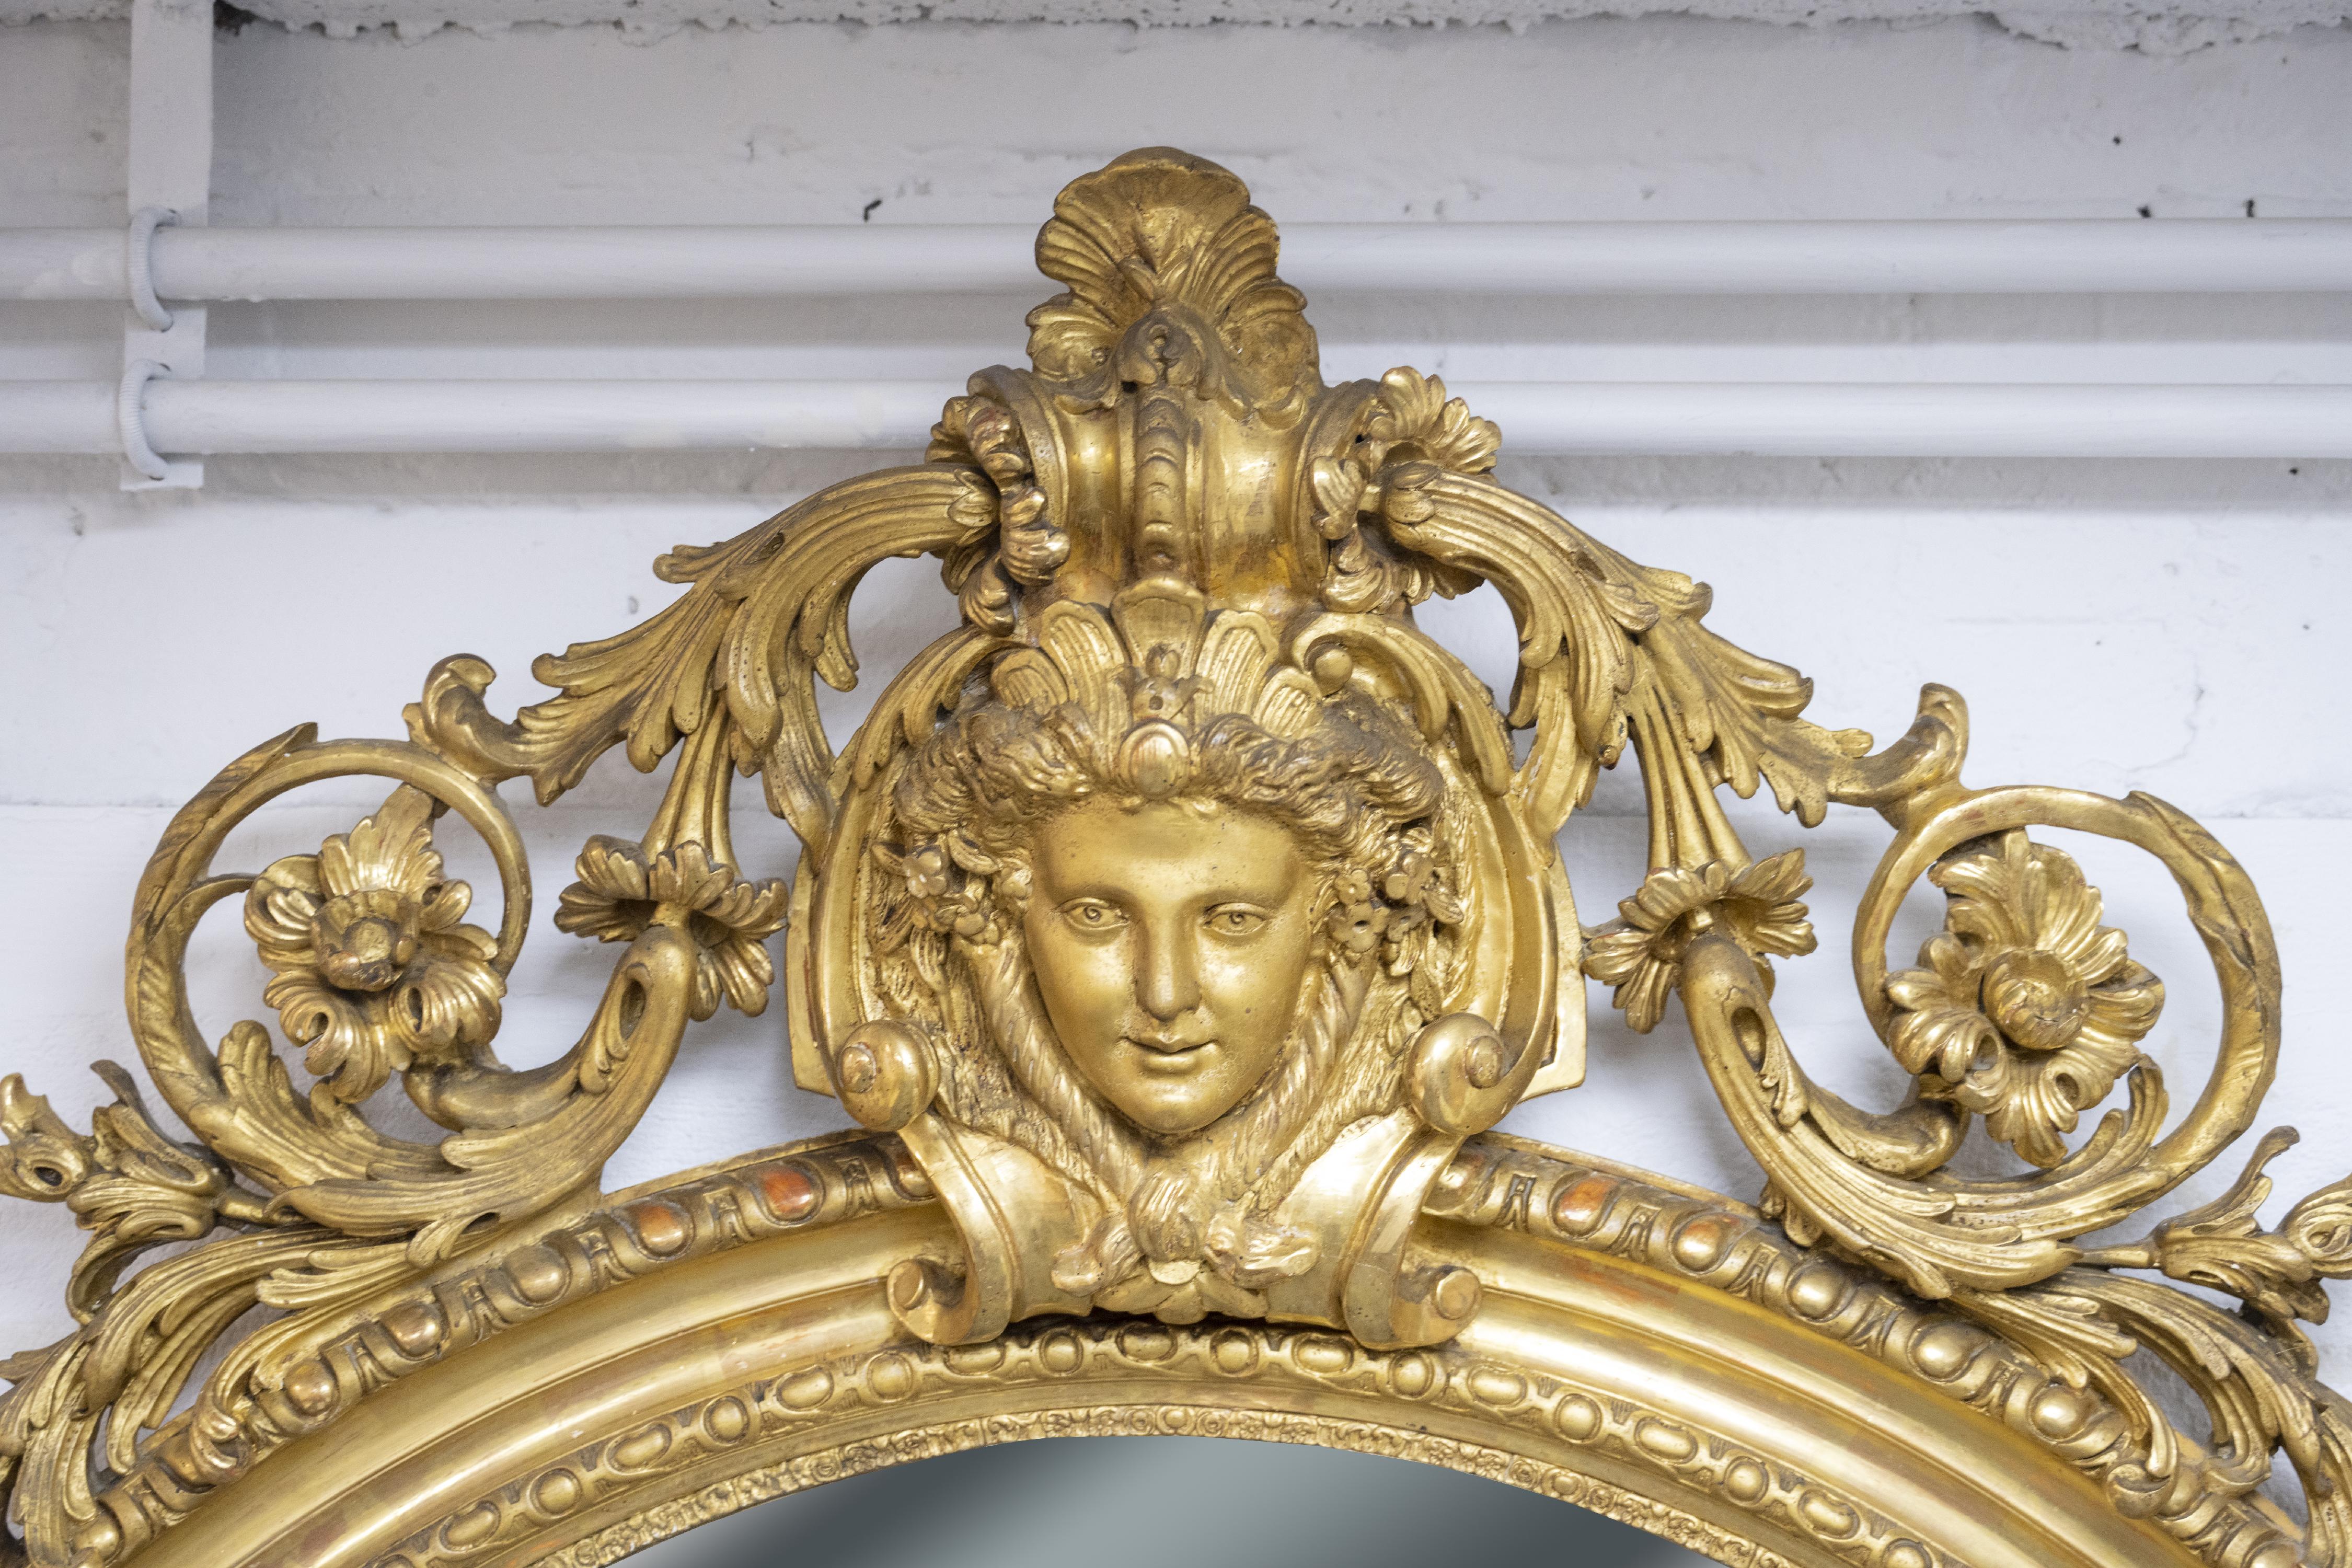 Napoleon III Large Gilded Trumeau with Birds, Putti and Woman’s Face on Openwork Decoration